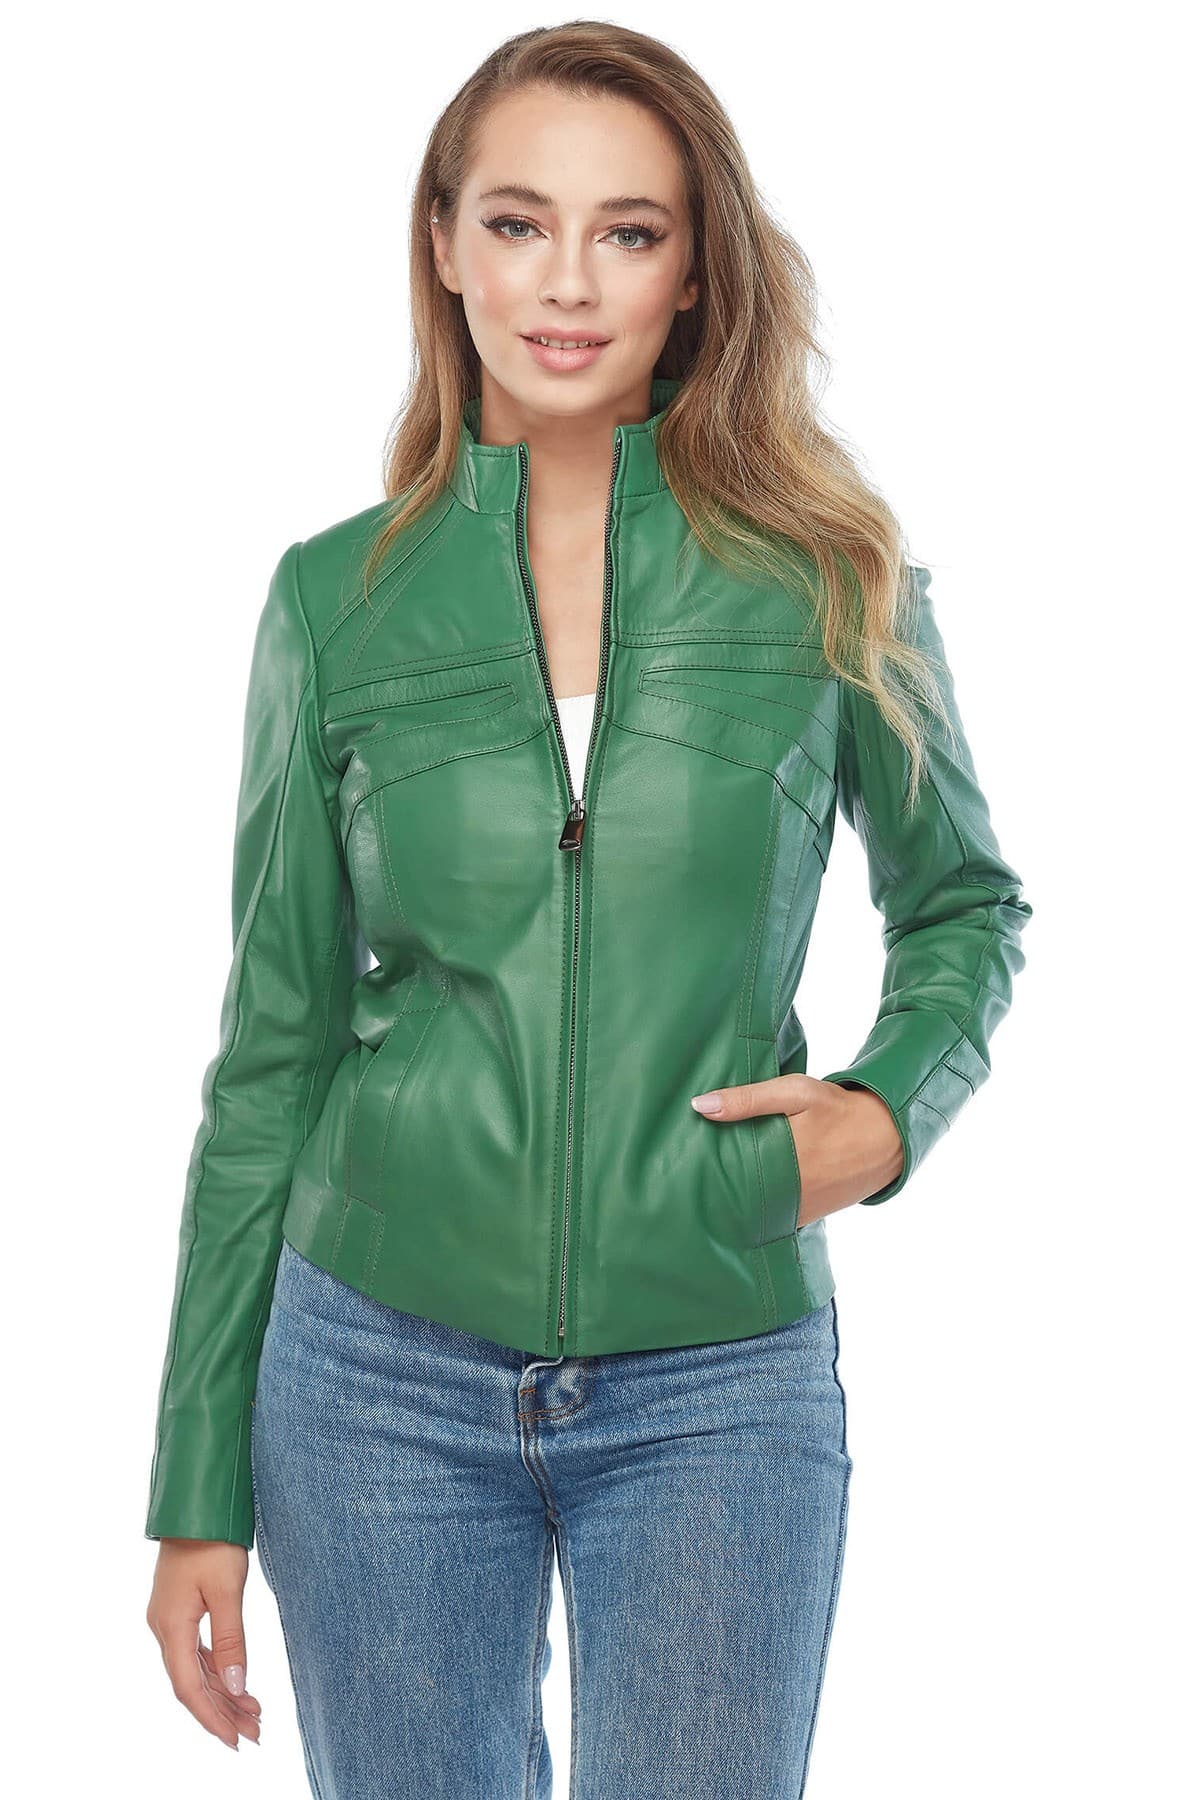 Amanda Griffin Women's 100 % Real Green Leather Jacket